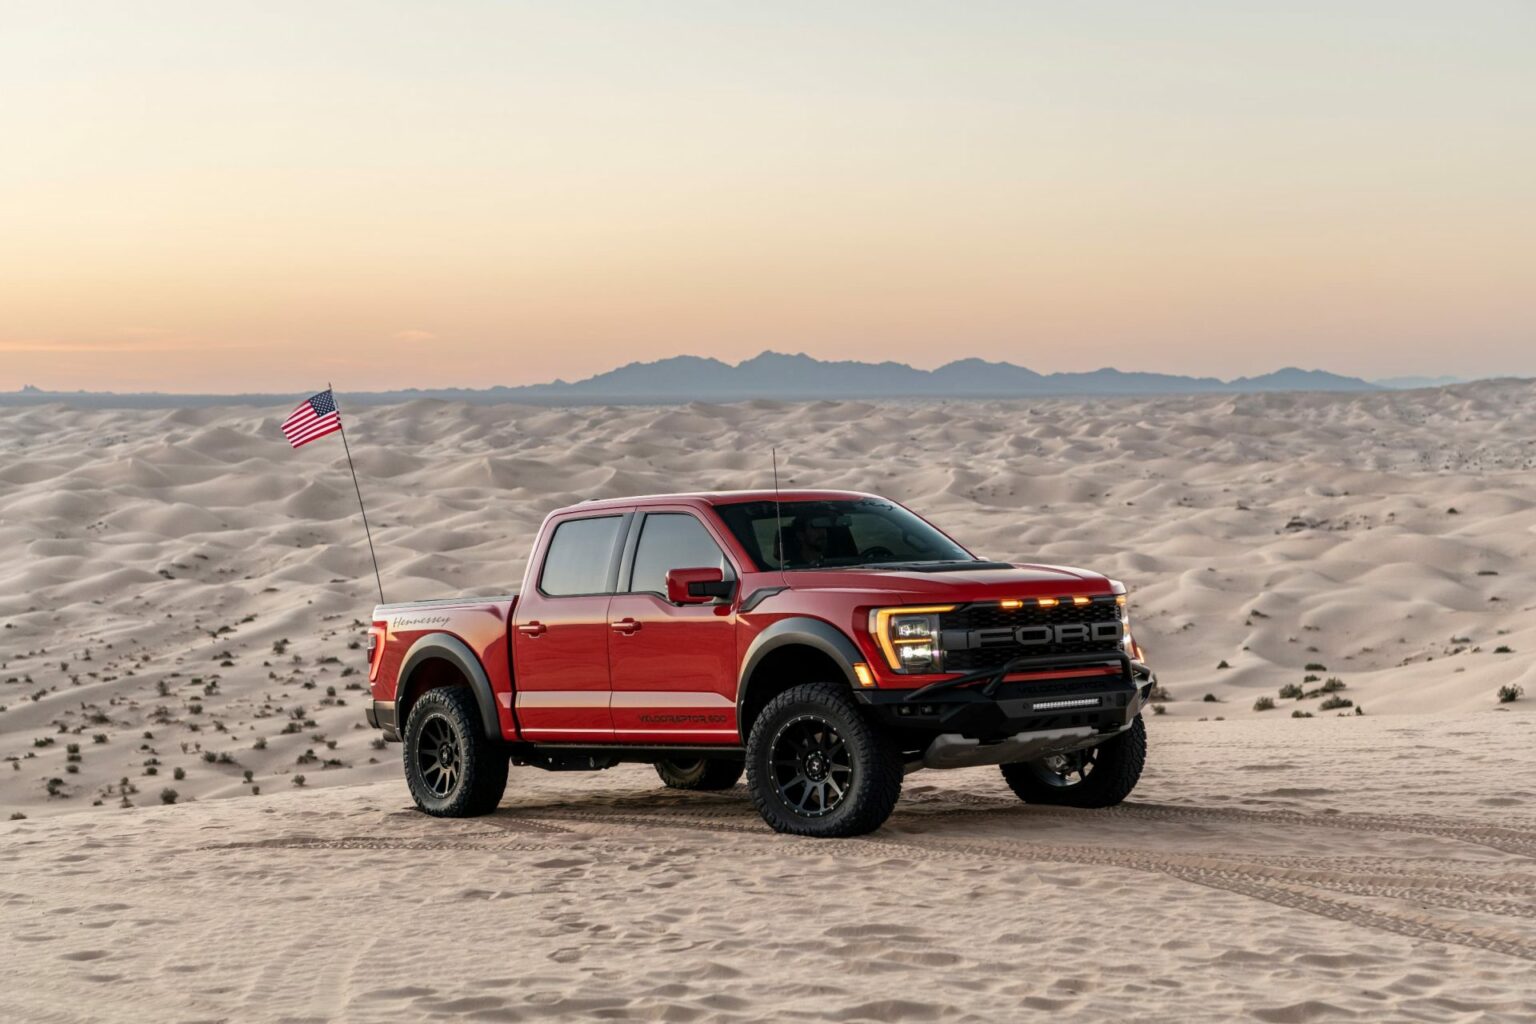 Californian Sand Dunes Are No Match For The 2022 Hennessey VelociRaptor ...